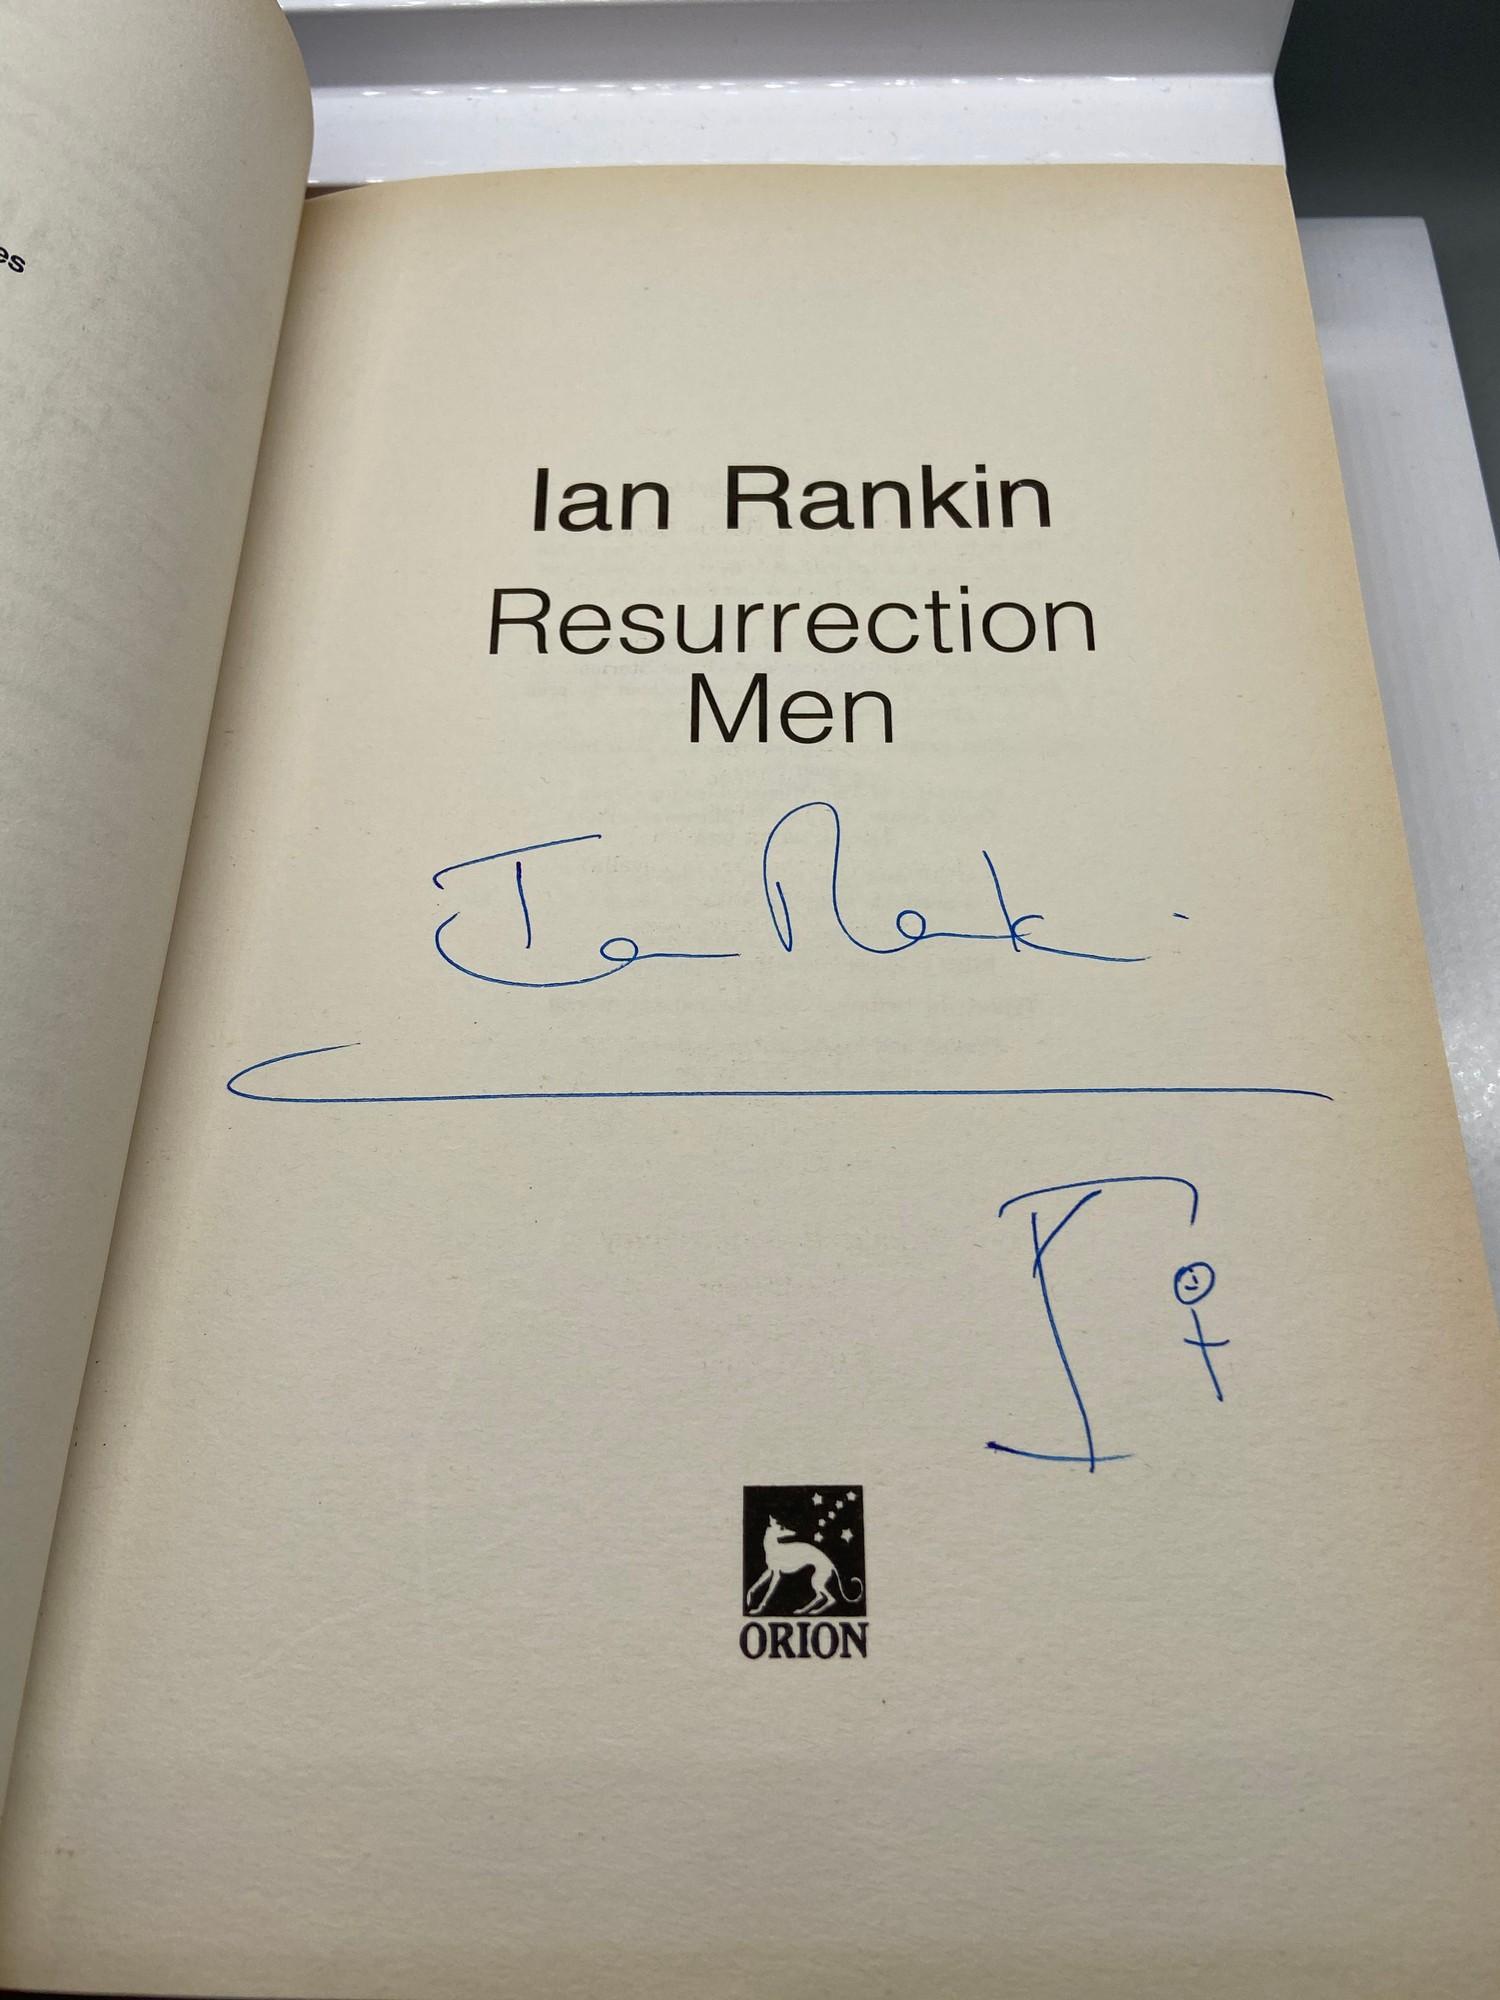 A Signed book by Ian Rankin titled Resurrection Men. Signed in pen and Gallows doodle drawing by the - Image 4 of 6